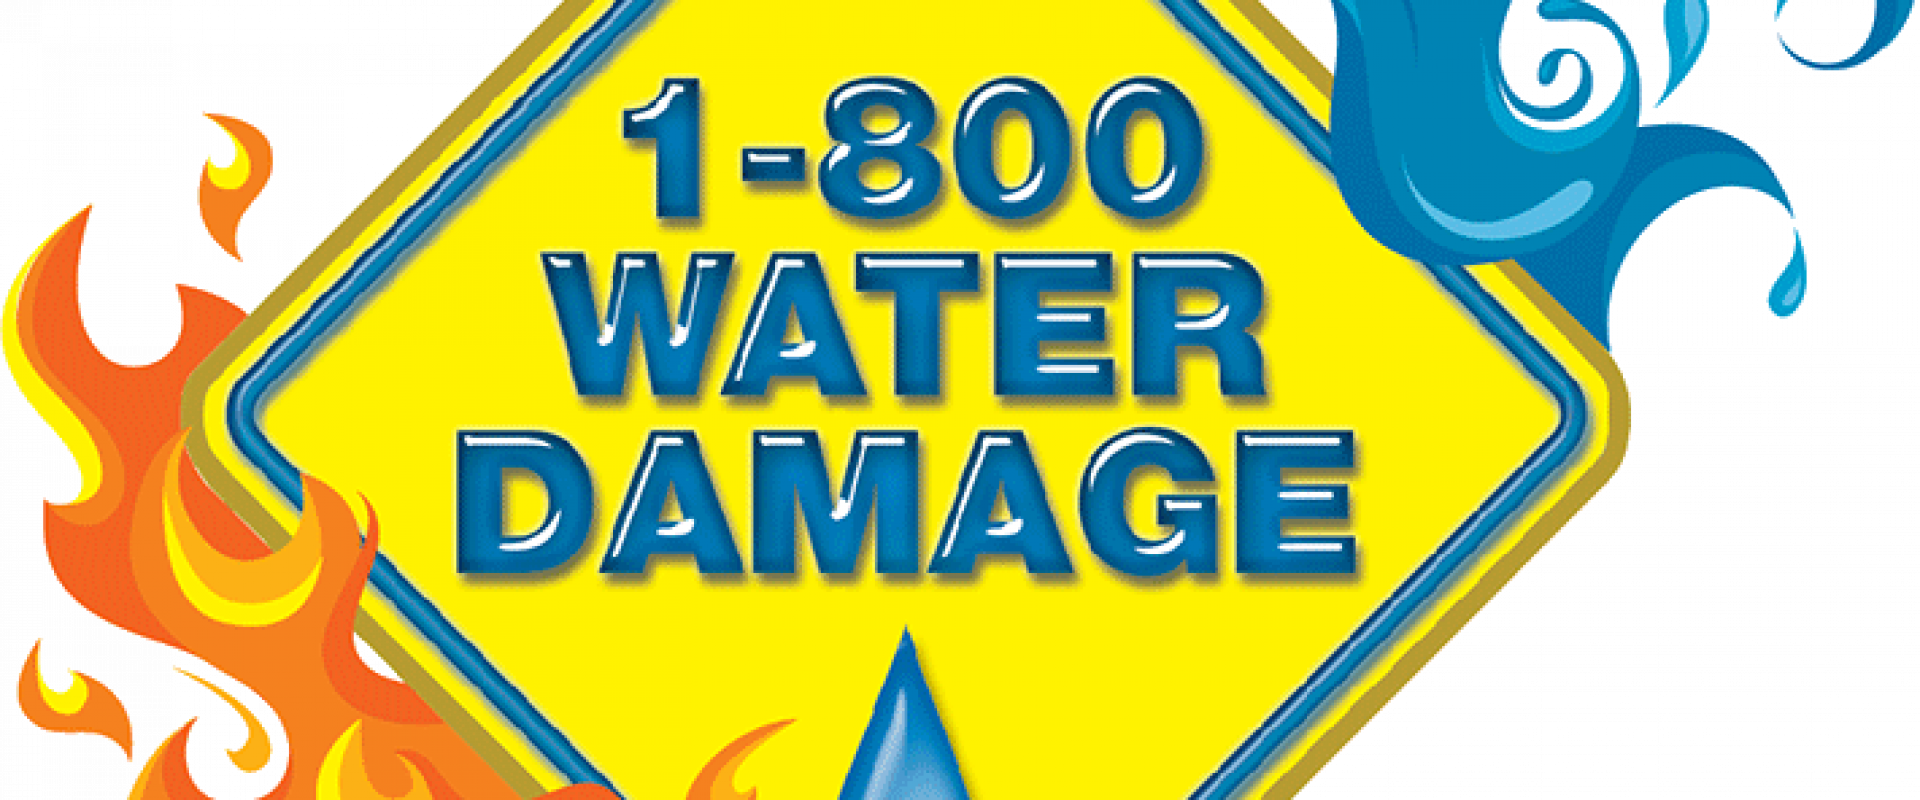 Our 1-800 Water Damage Client Experienced an 80% Increase Over 8 months in 2015